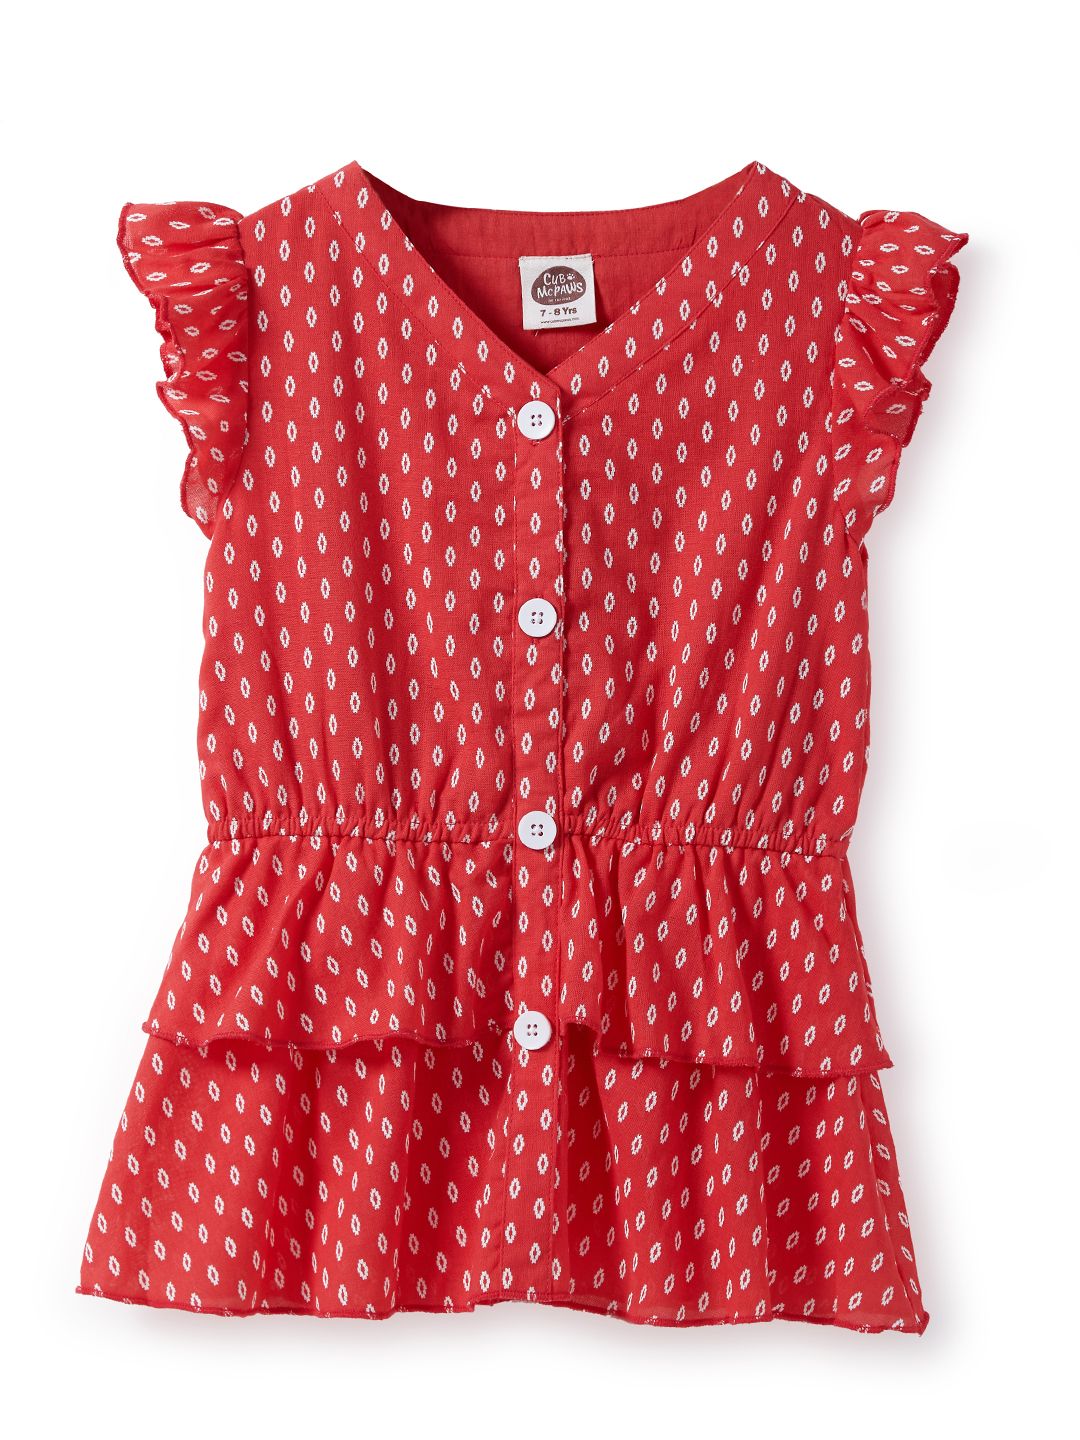 Red Printed Fashion Woven Top for Girls Age 4 to 12 Years (EOSS)